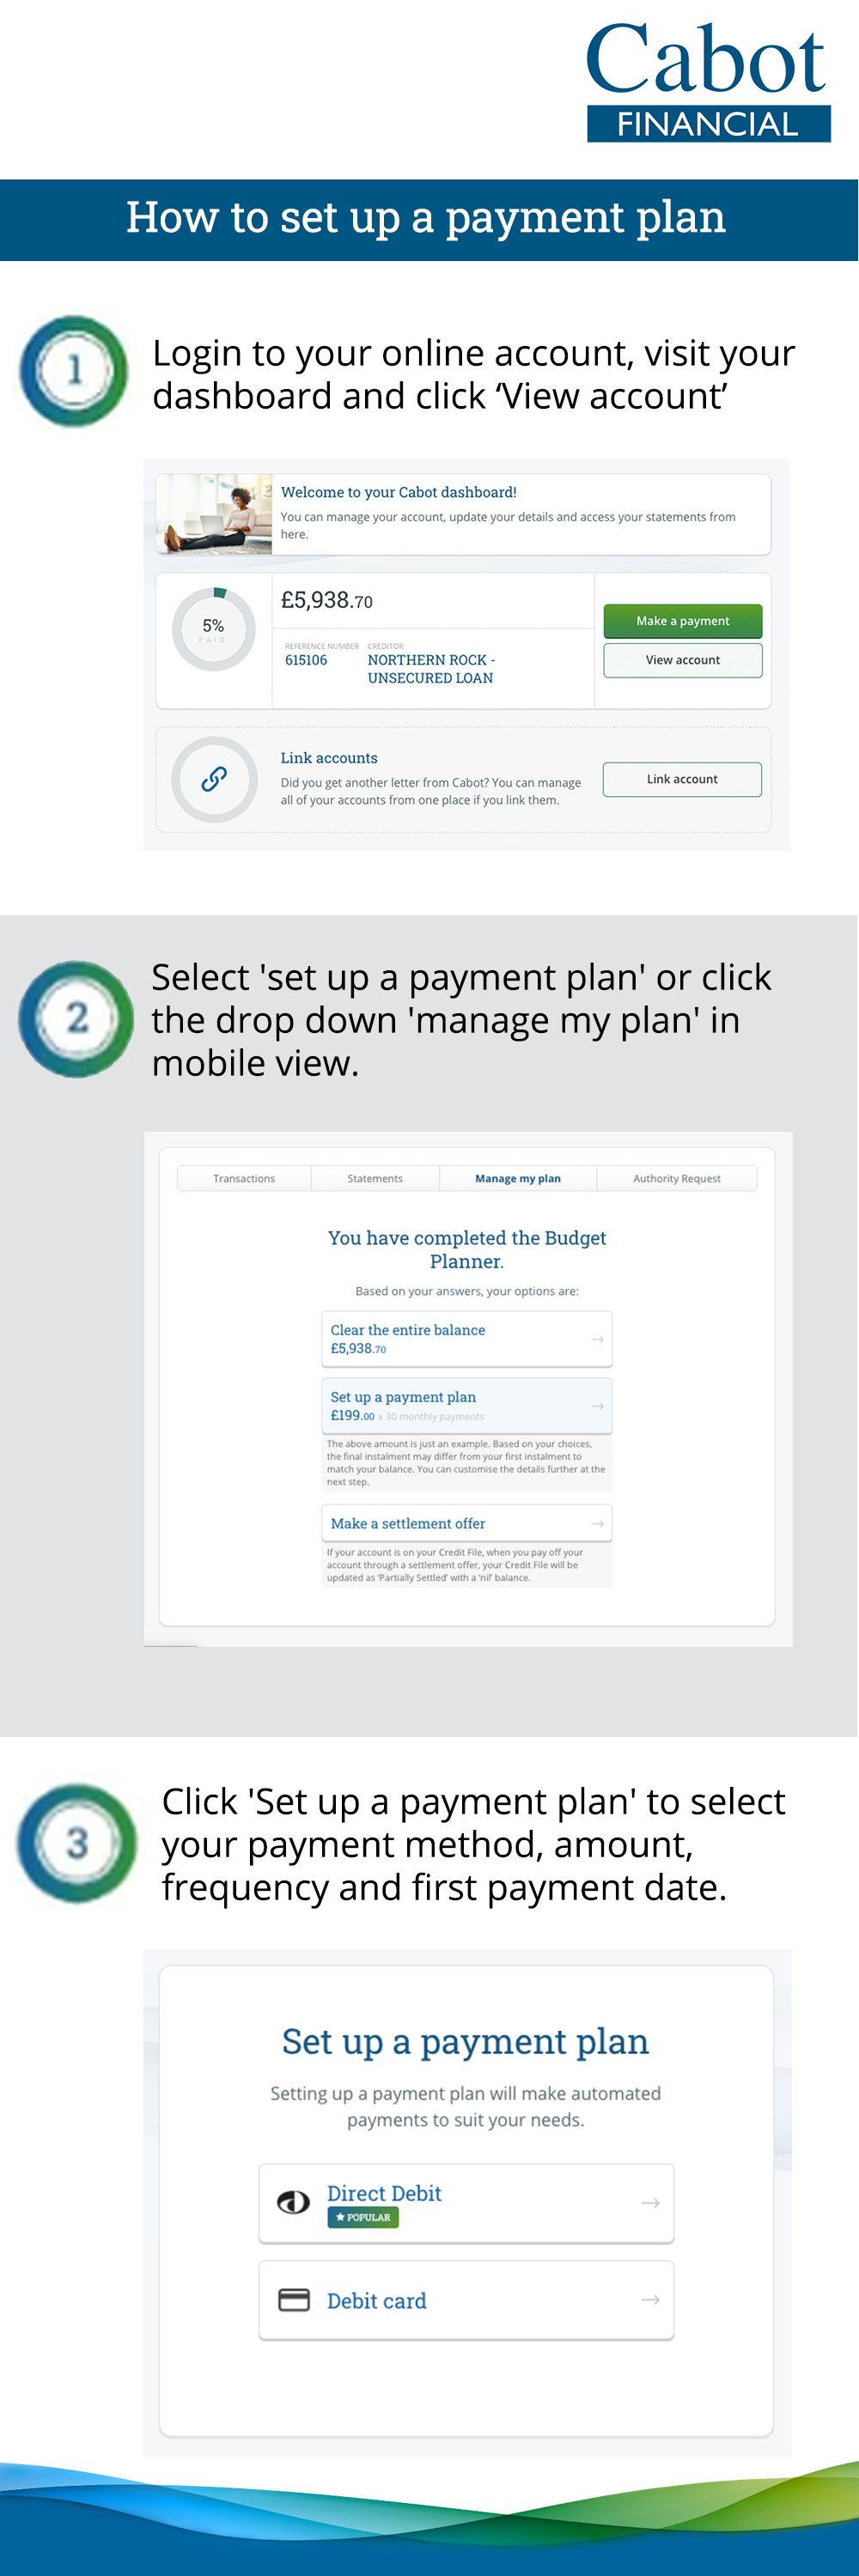 Infographic to help you set up a payment plan